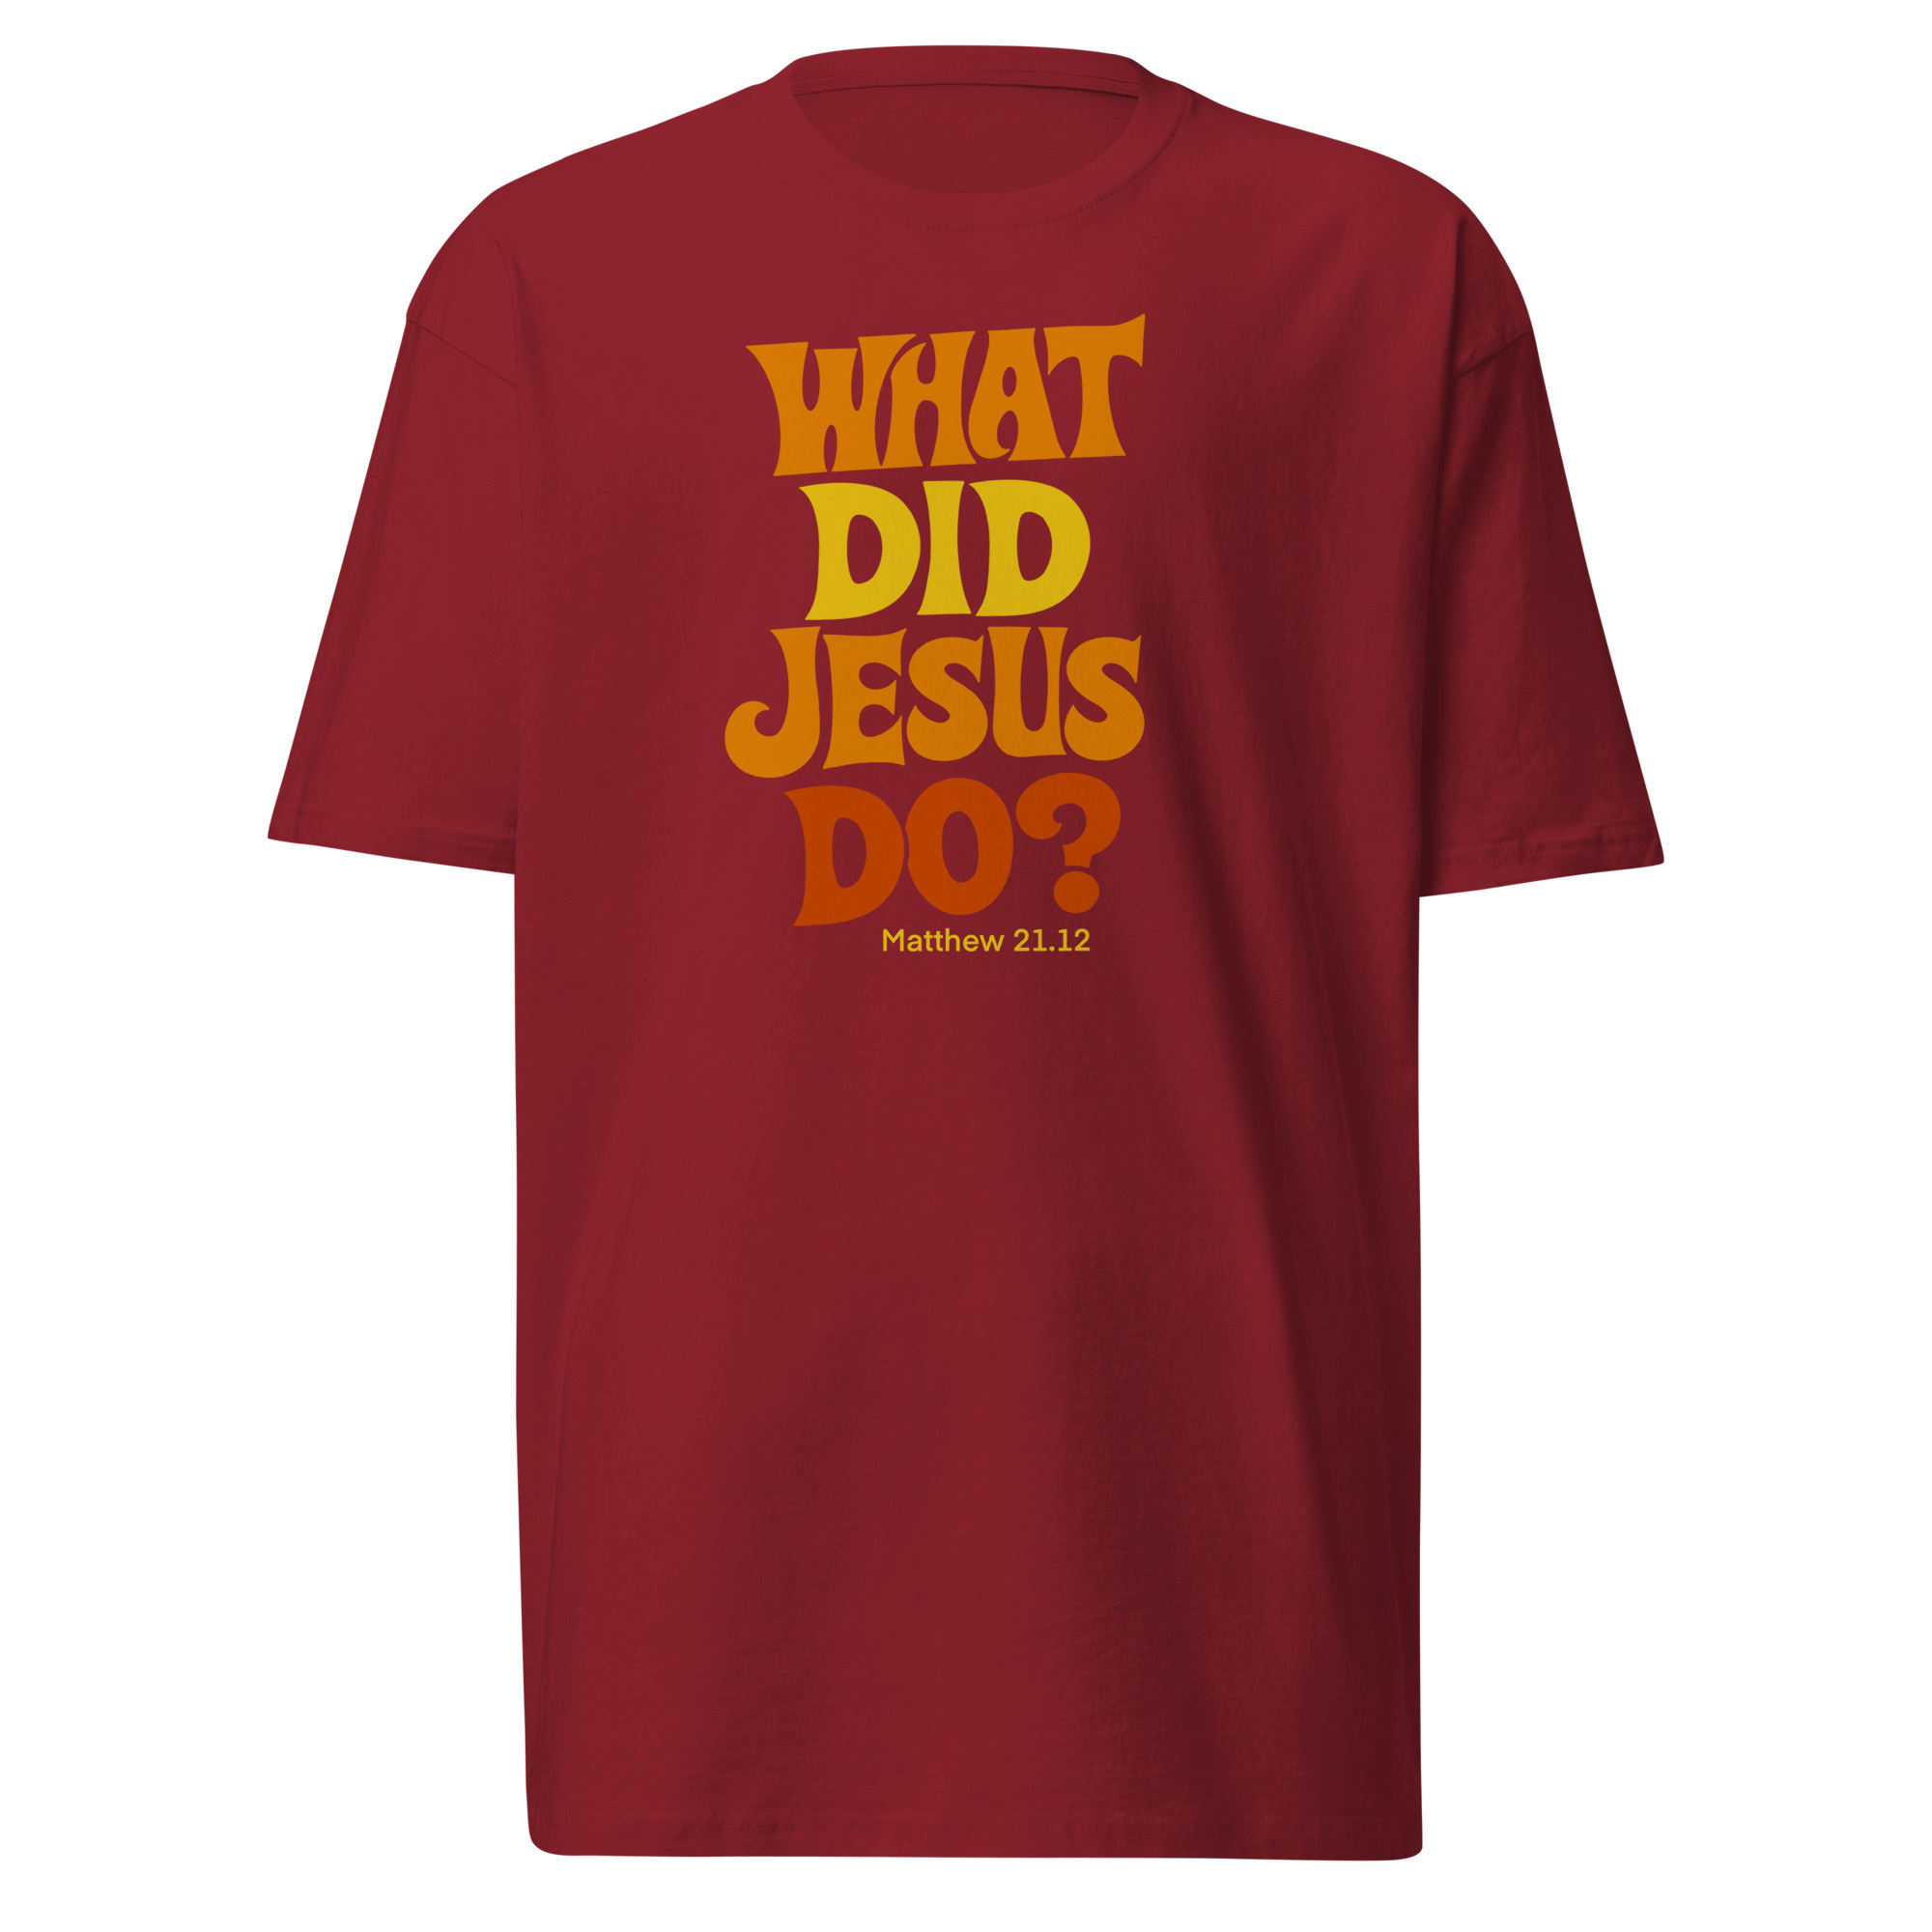 What Did Jesus Do? T-Shirt - Brick Red / M